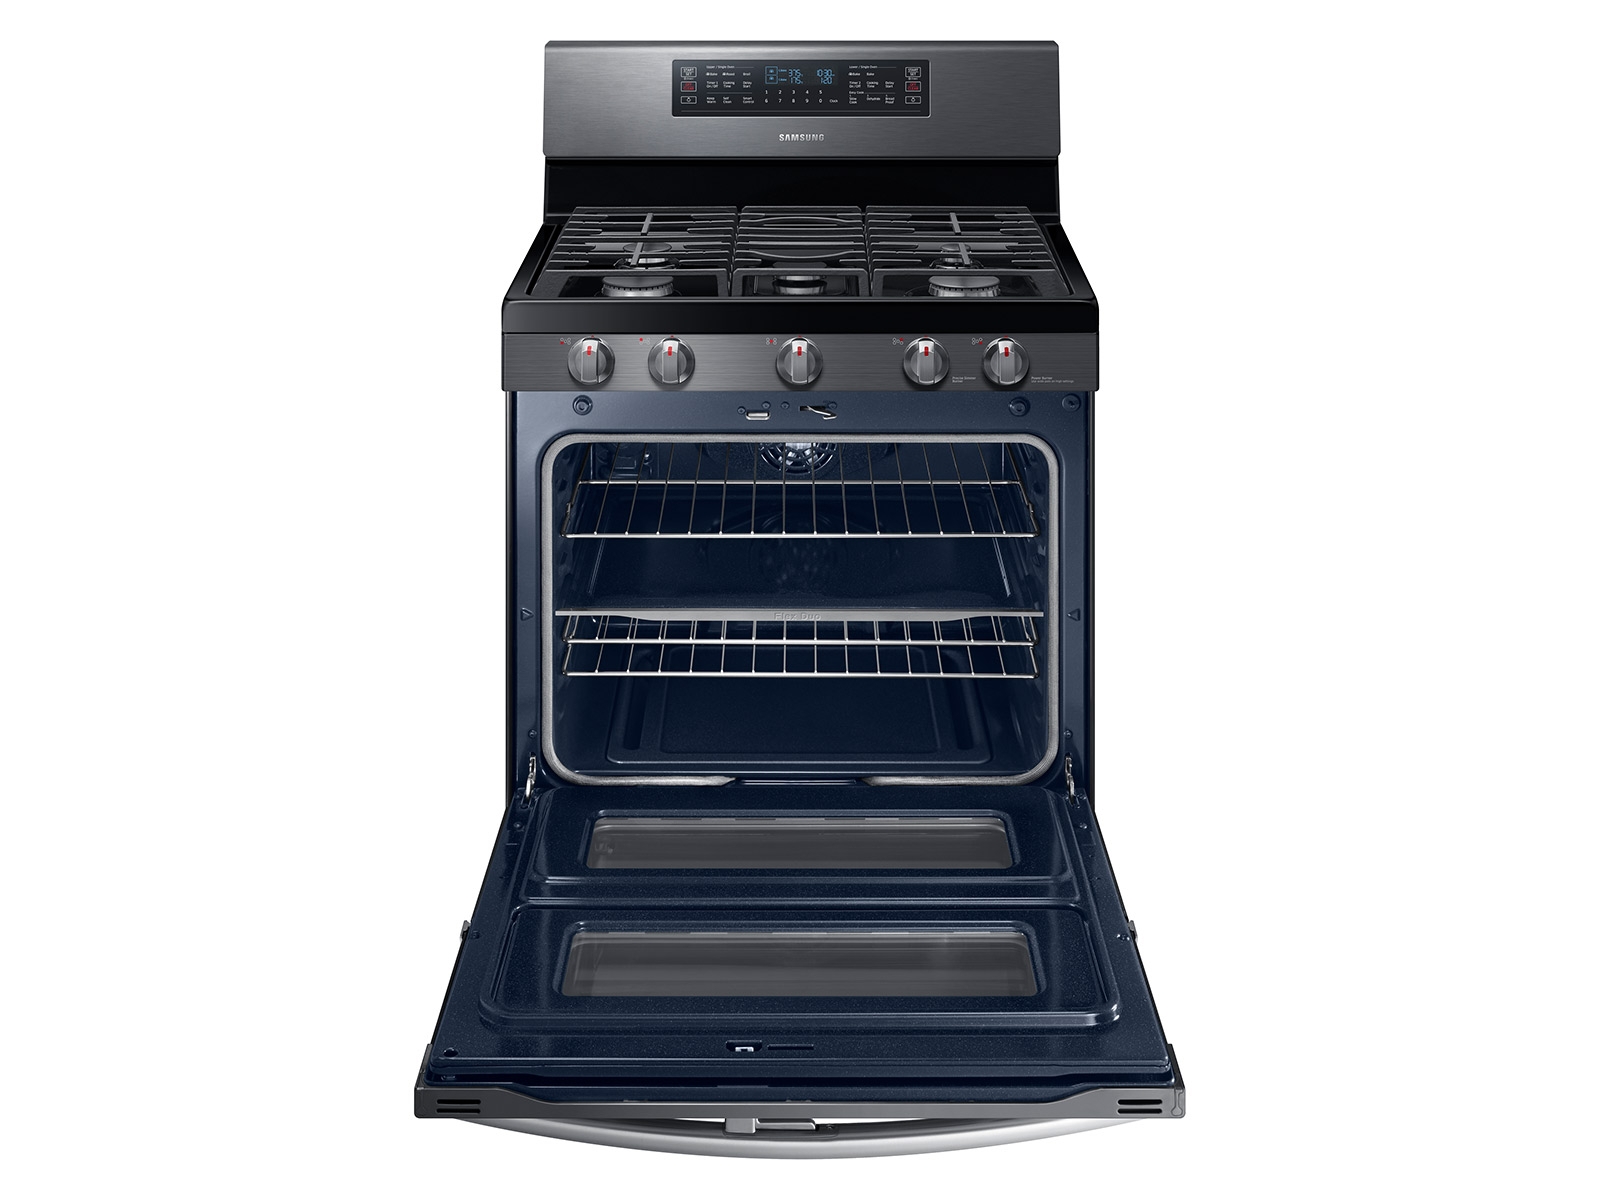 Thumbnail image of 5.8 cu ft. Smart Freestanding Gas Range with Flex Duo&trade; &amp; Dual Door in Black Stainless Steel